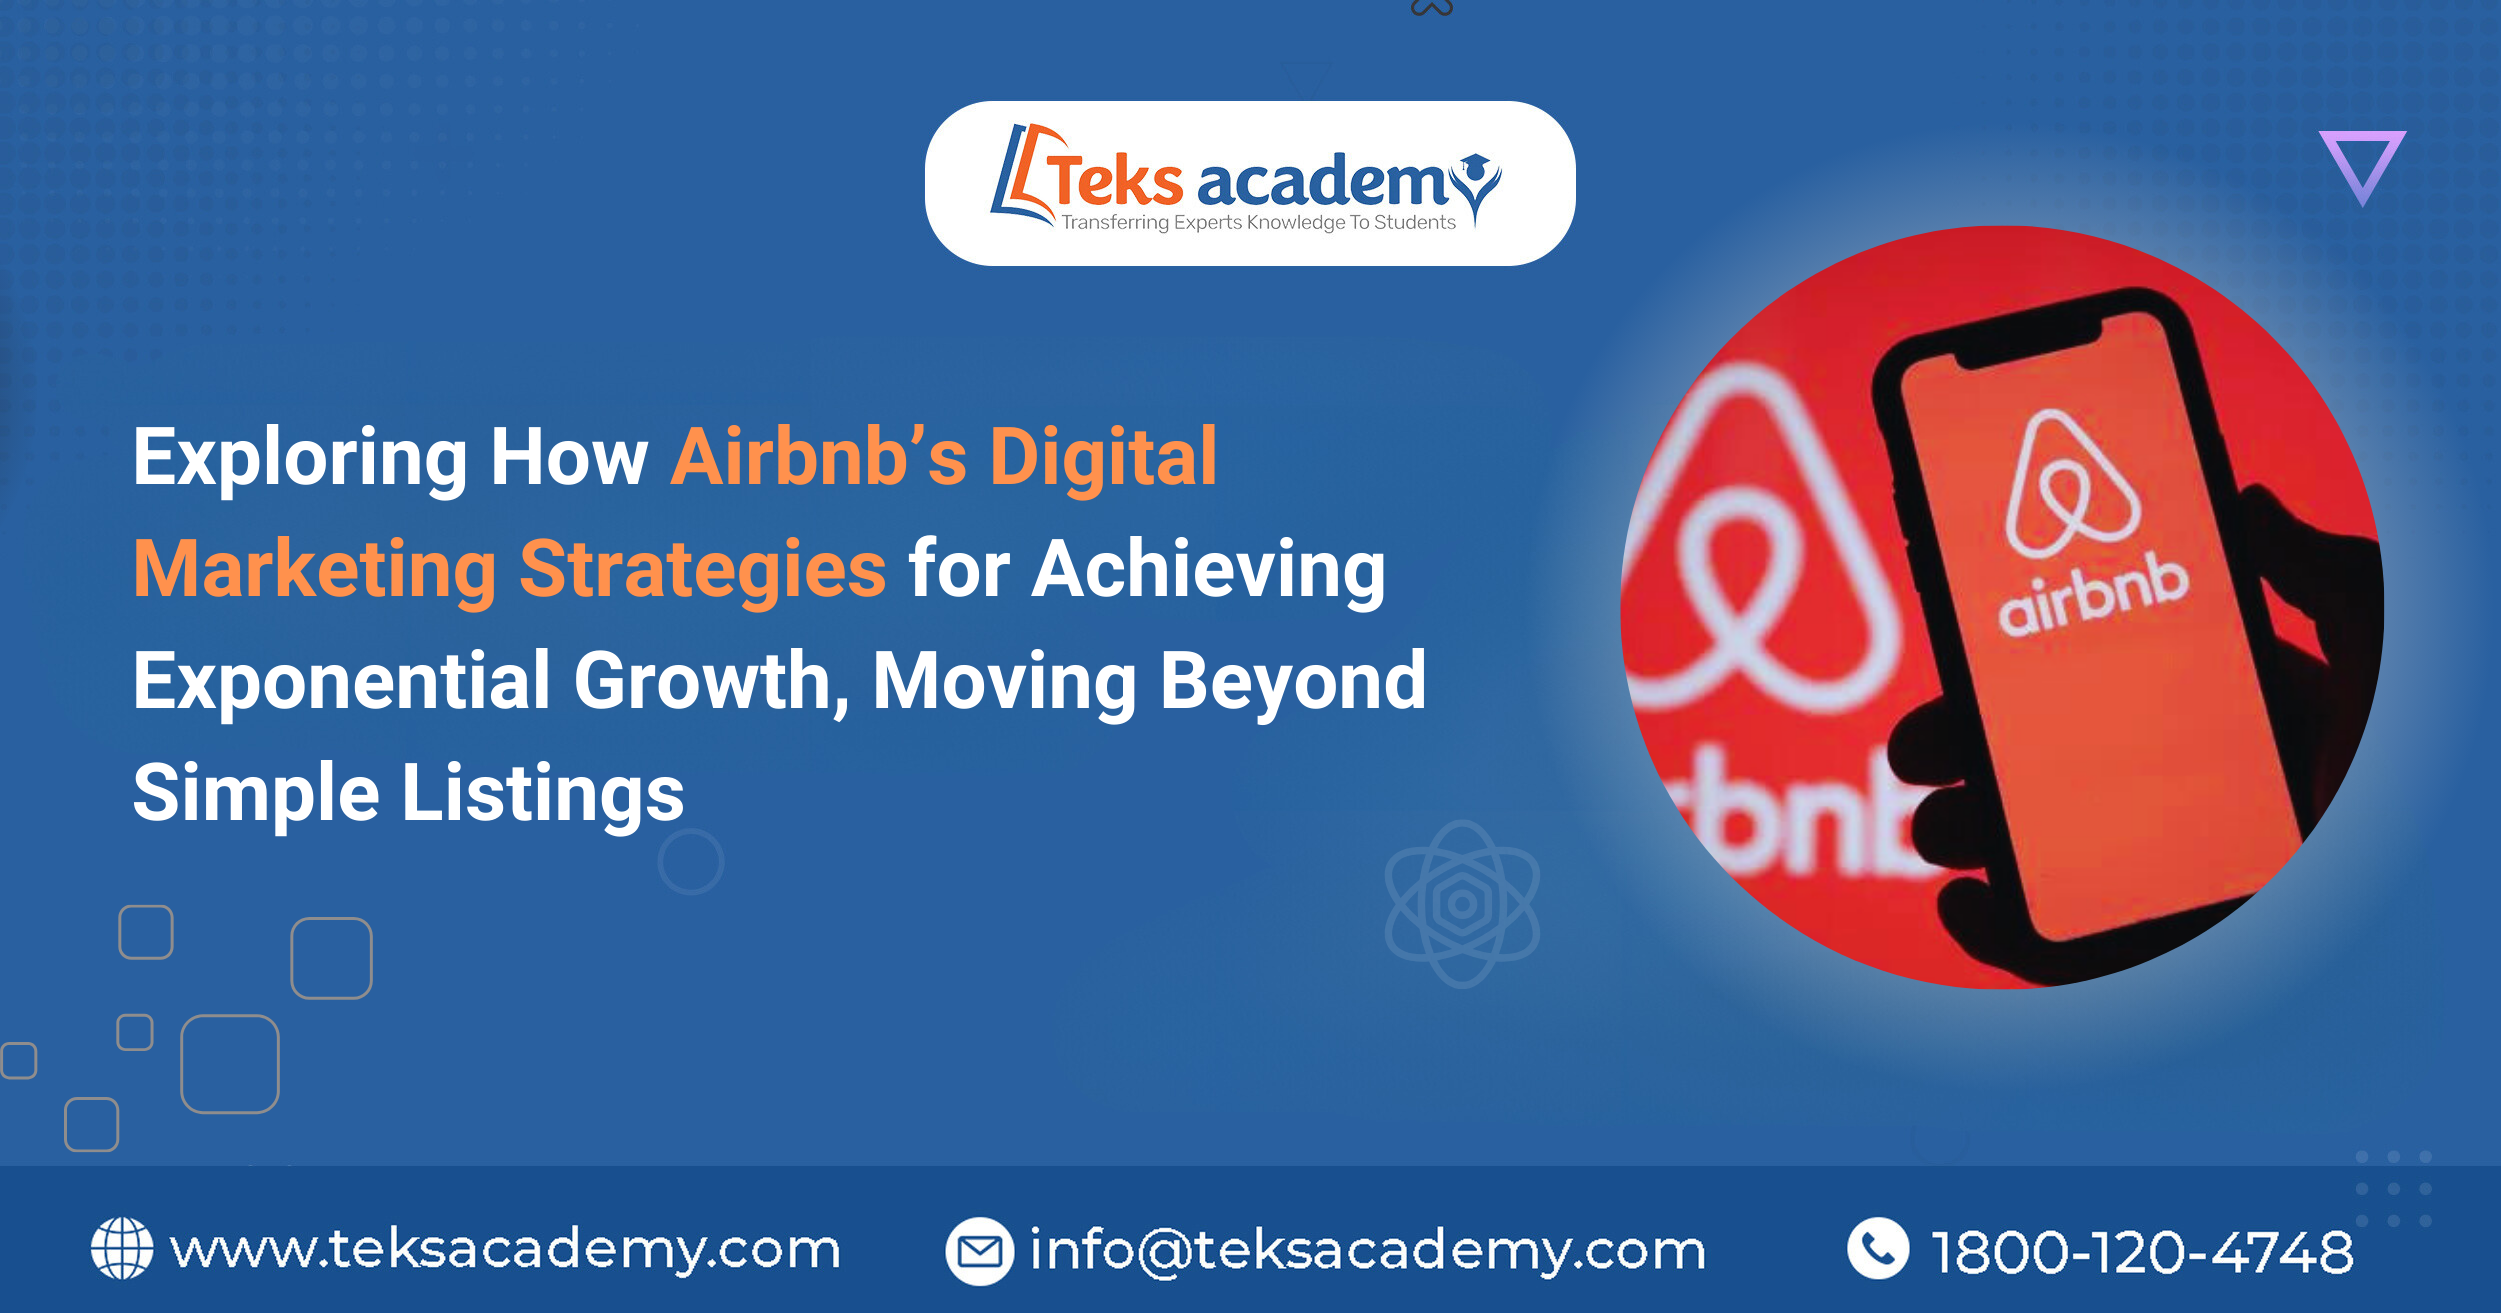 Exploring How Airbnb’s Digital Marketing Strategies for Achieving Exponential Growth, Moving Beyond Simple Listings